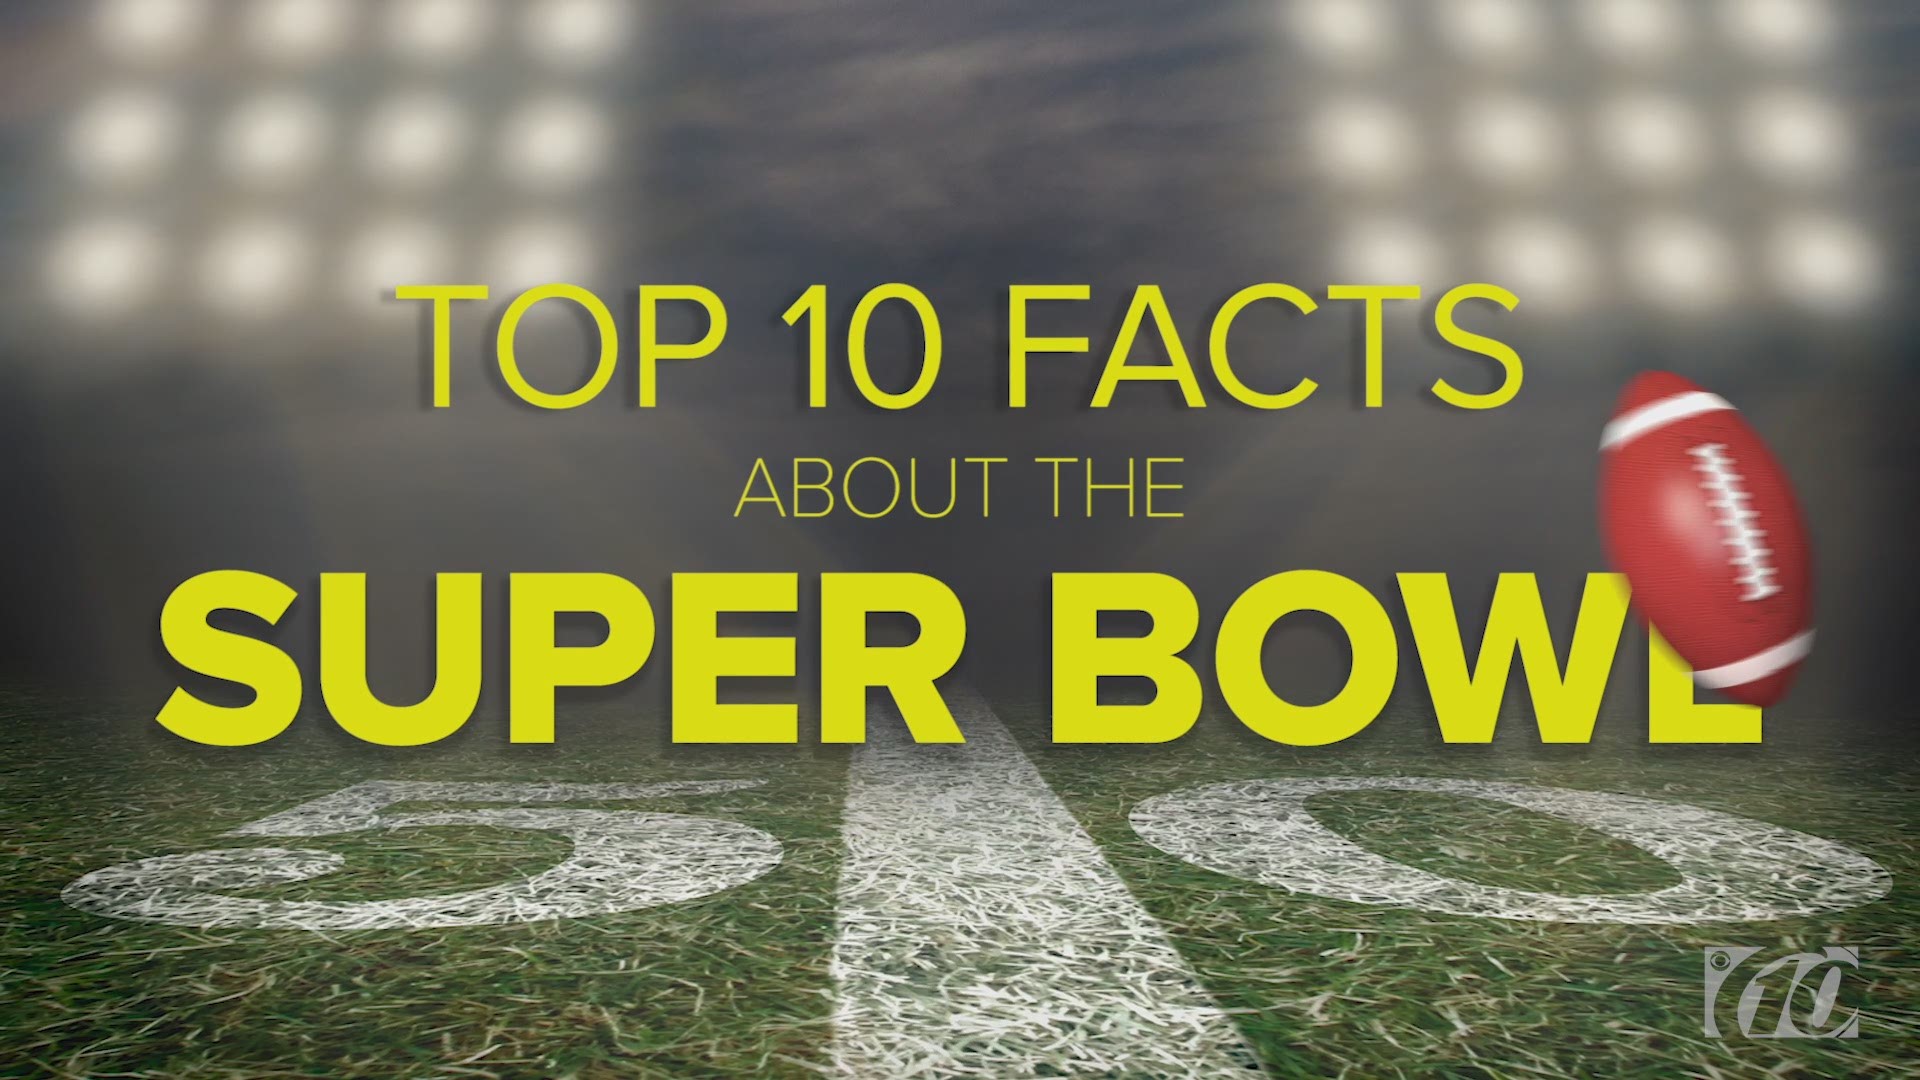 Facts About the Super Bowl